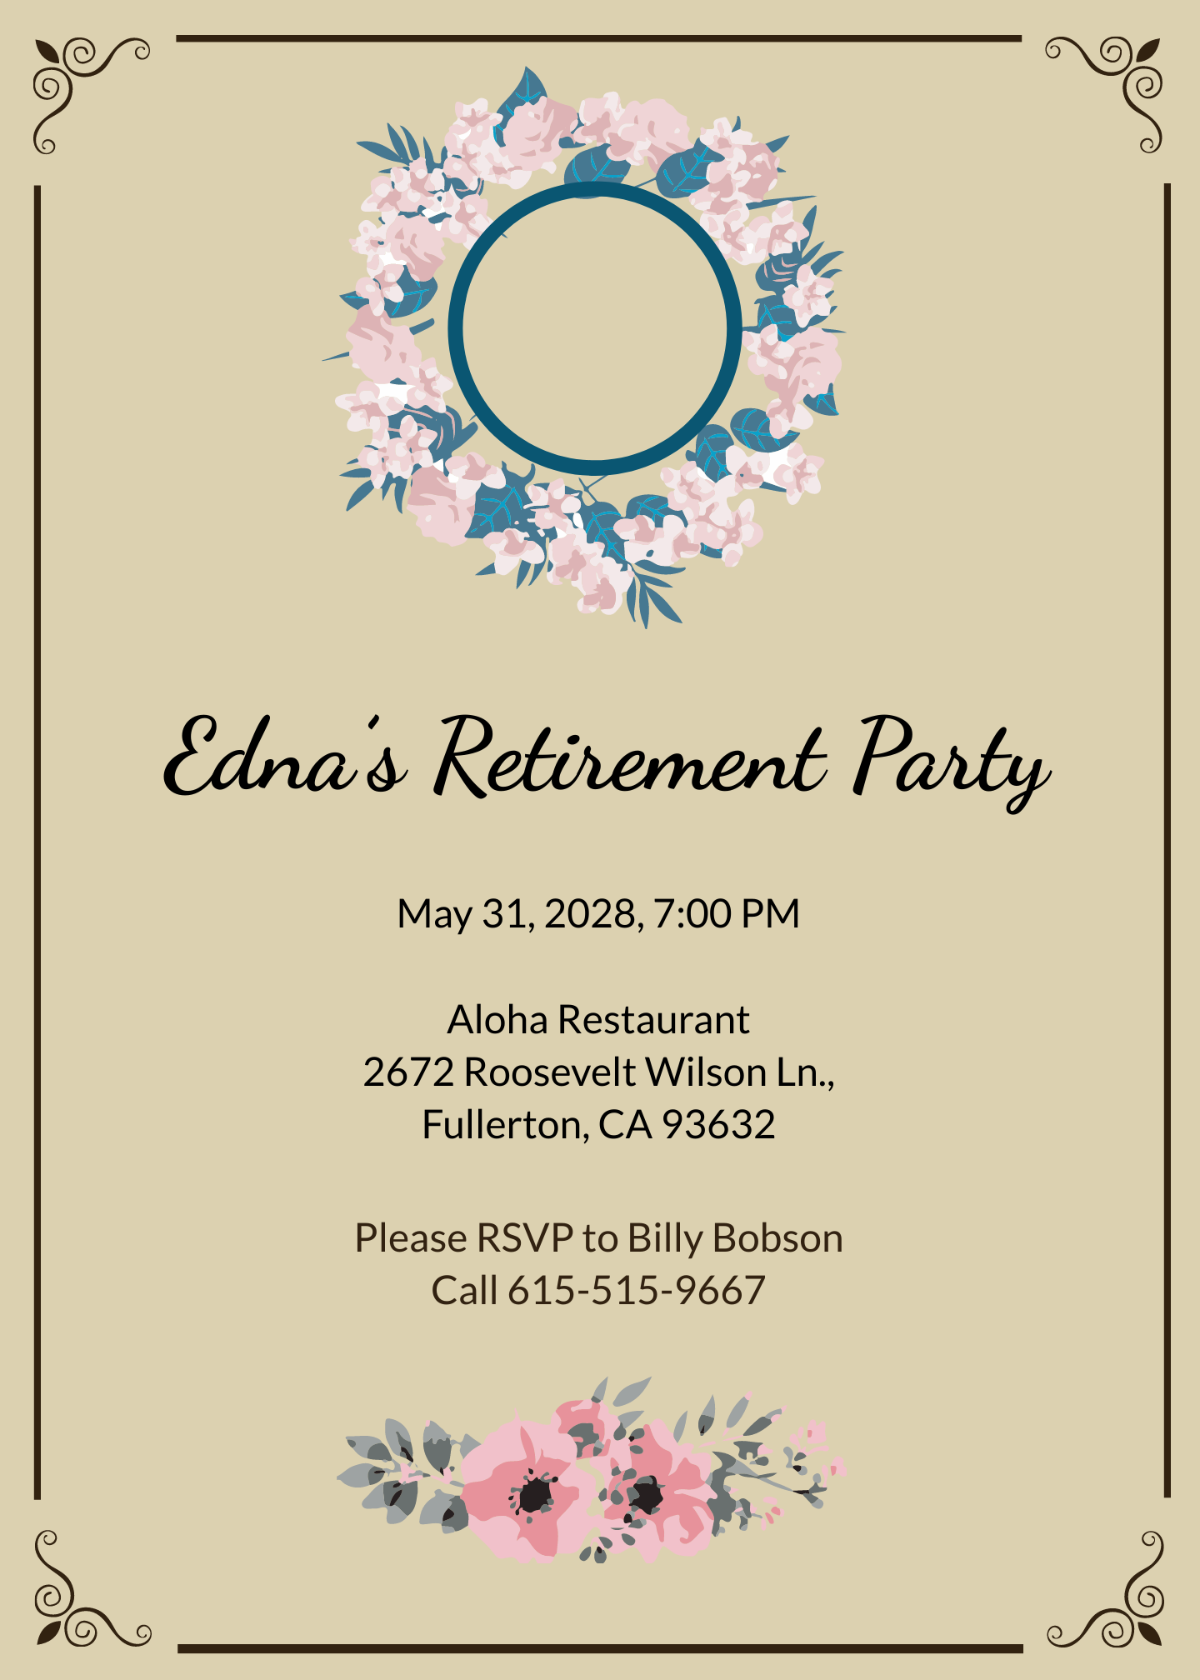 Free Retirement Party Invitation Template